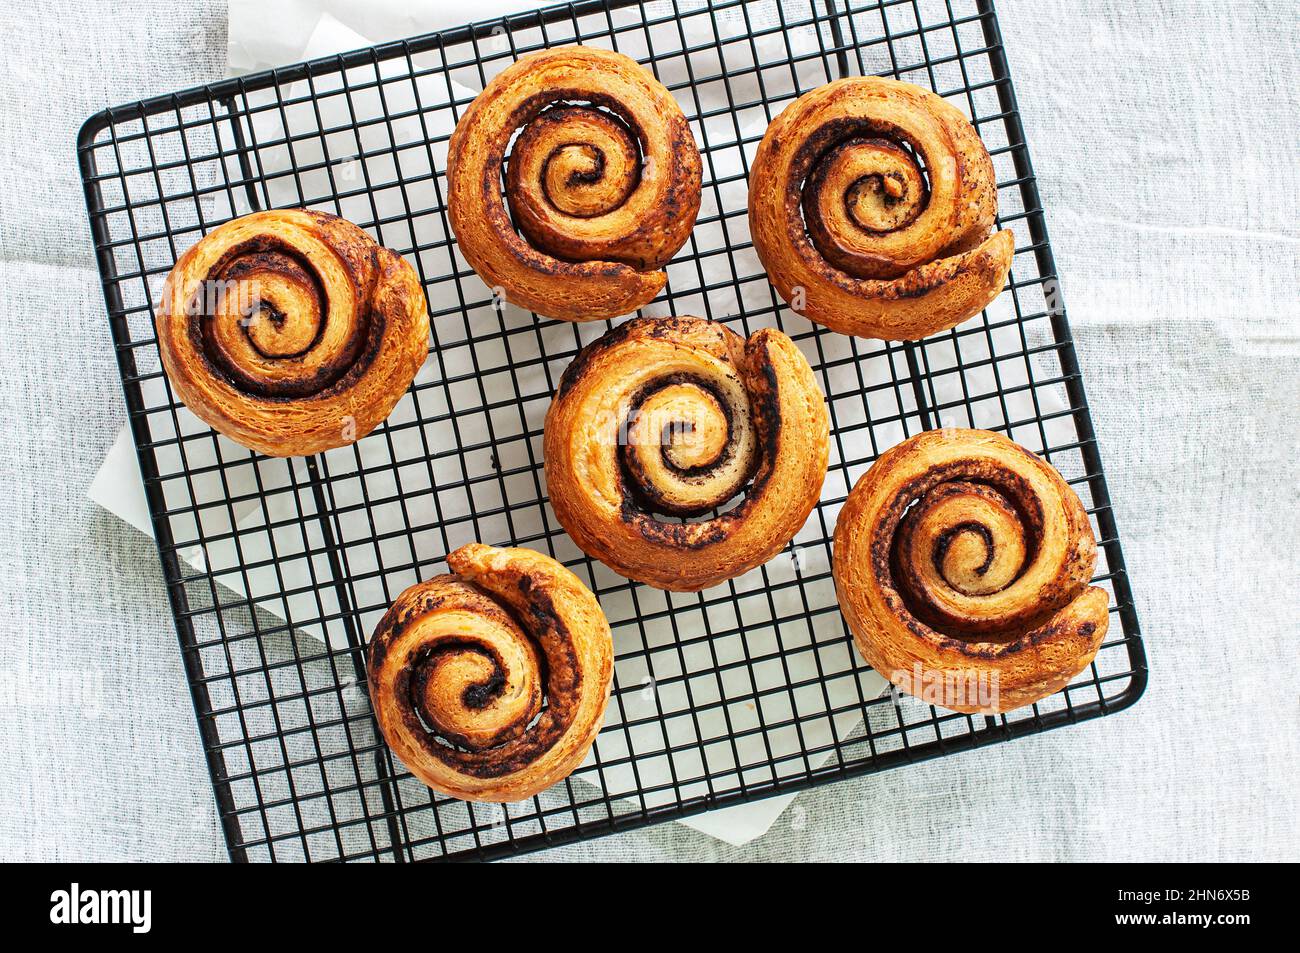 Top view of aromatic homemade yeasty buns with cinnamon on a cooling rack. White background. Stock Photo